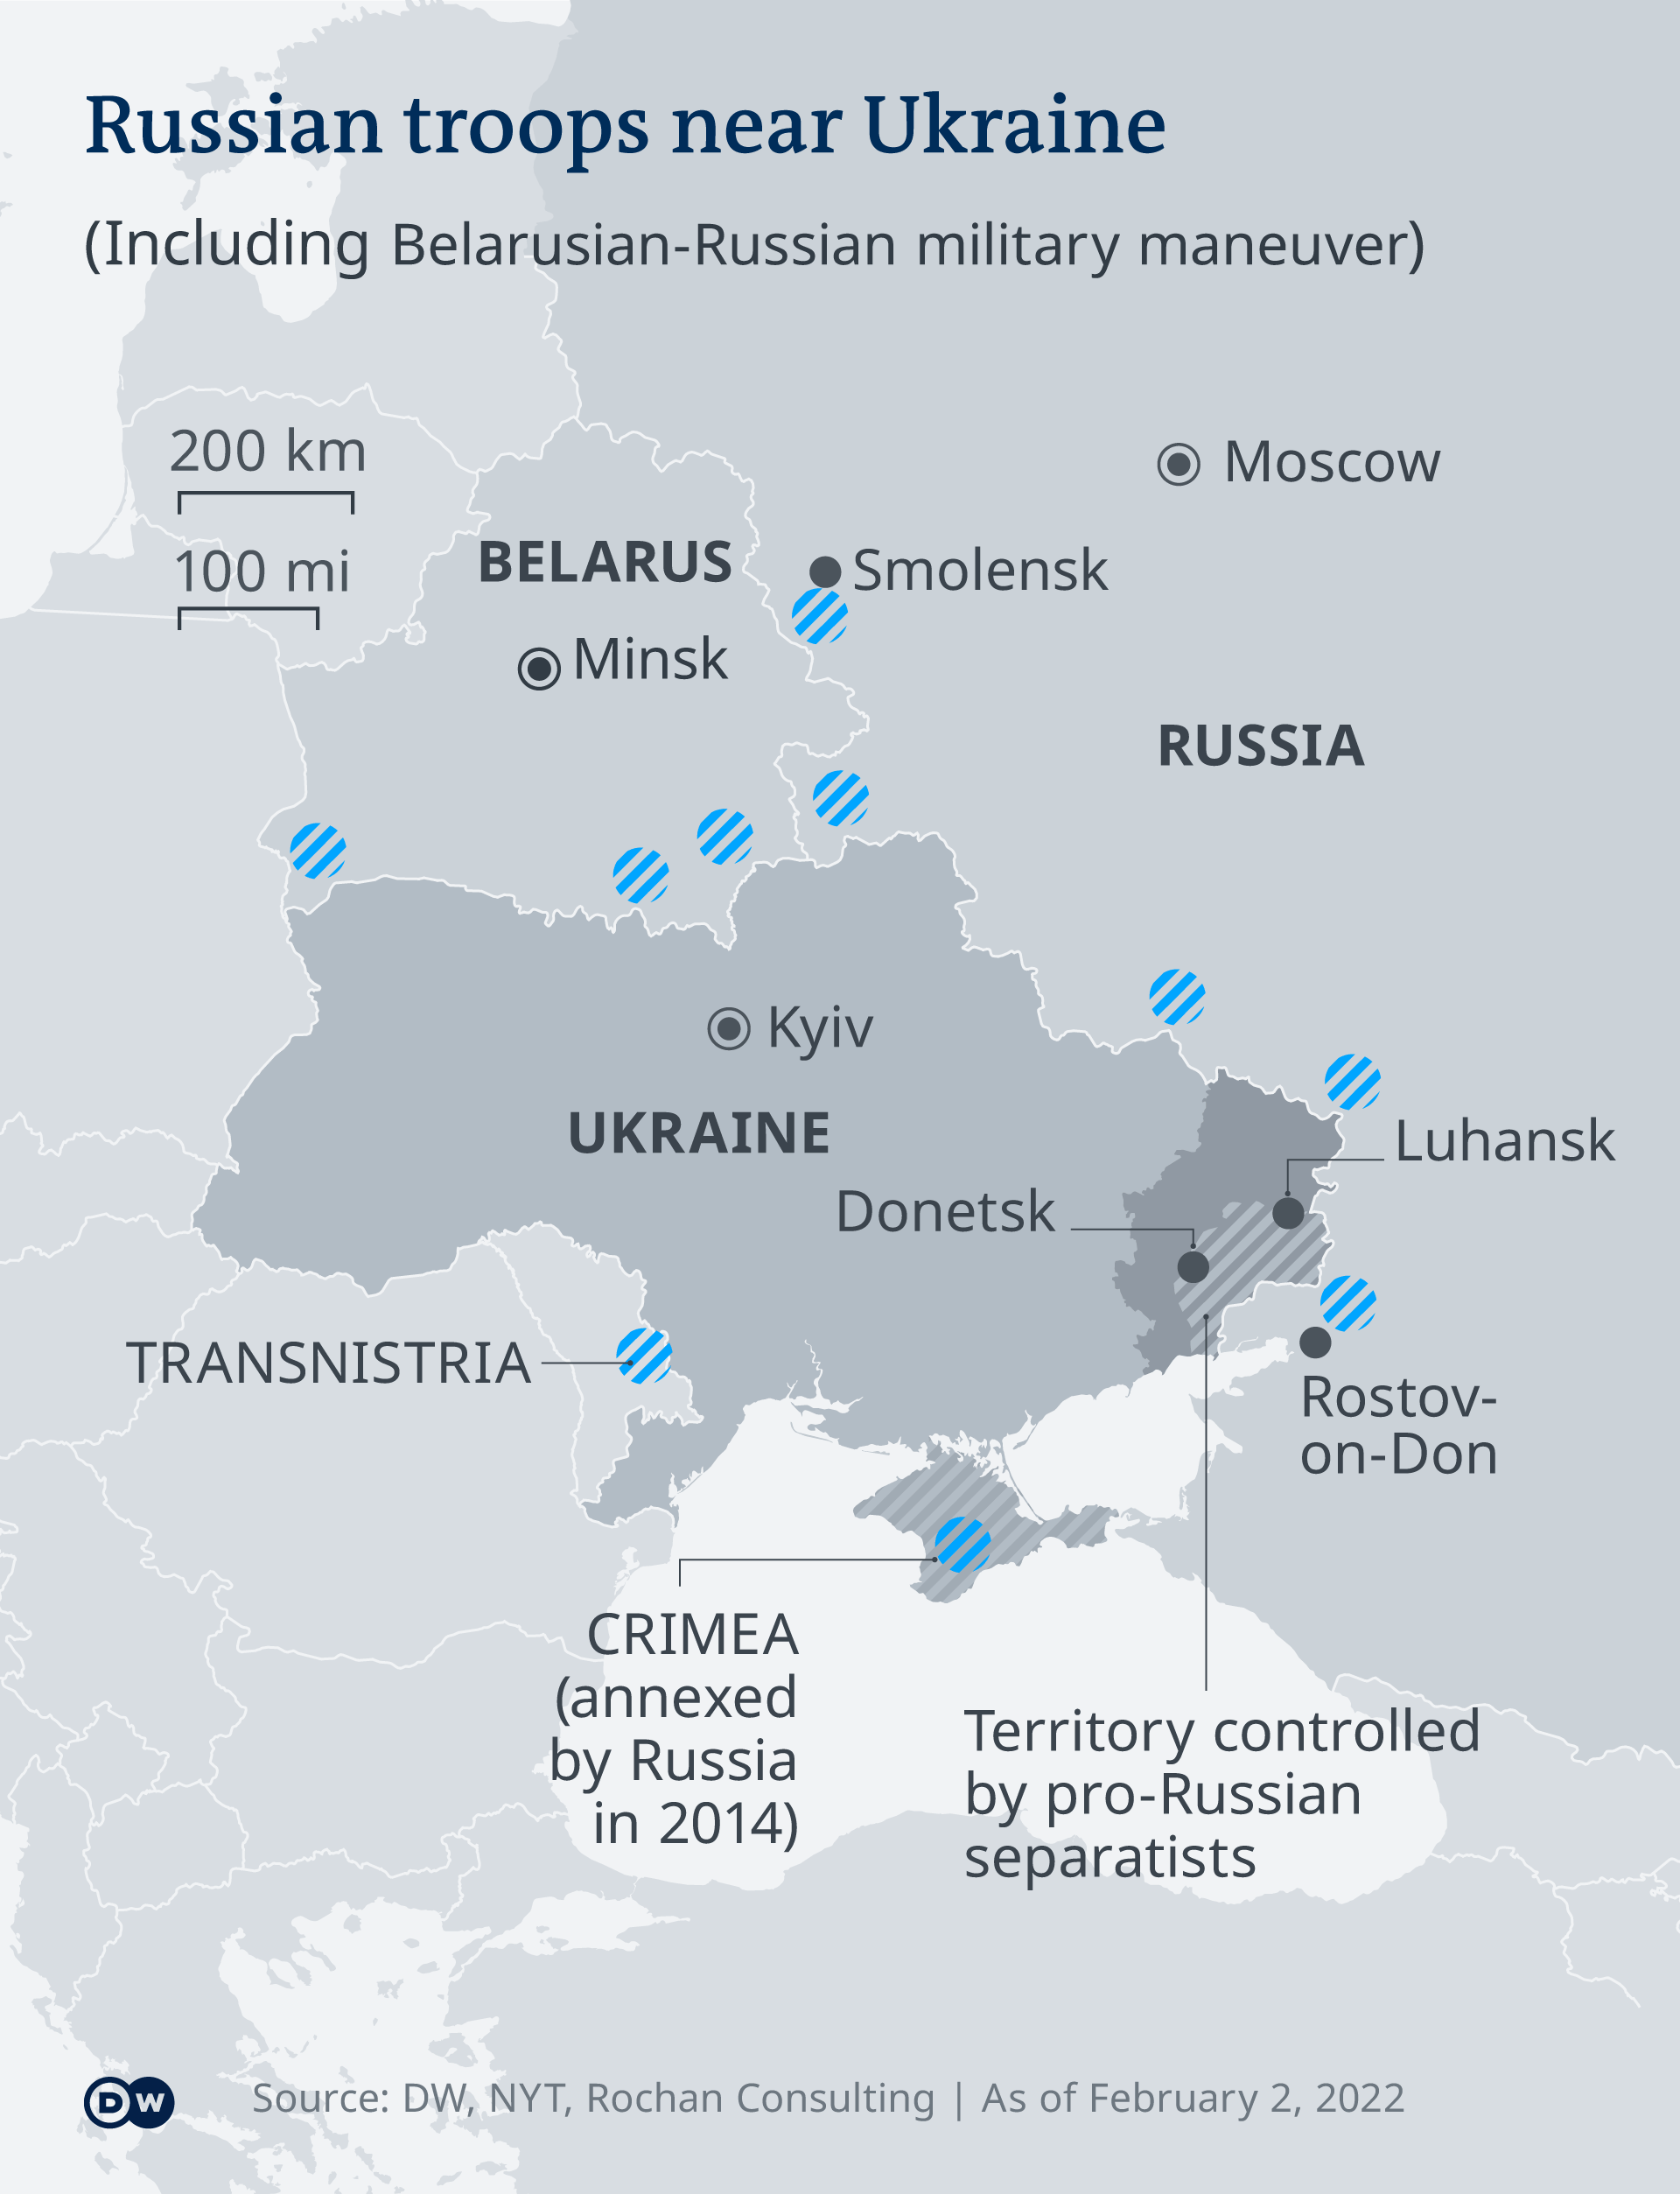 Infographic shows the positions of Russian troops on and around Ukrainian territory